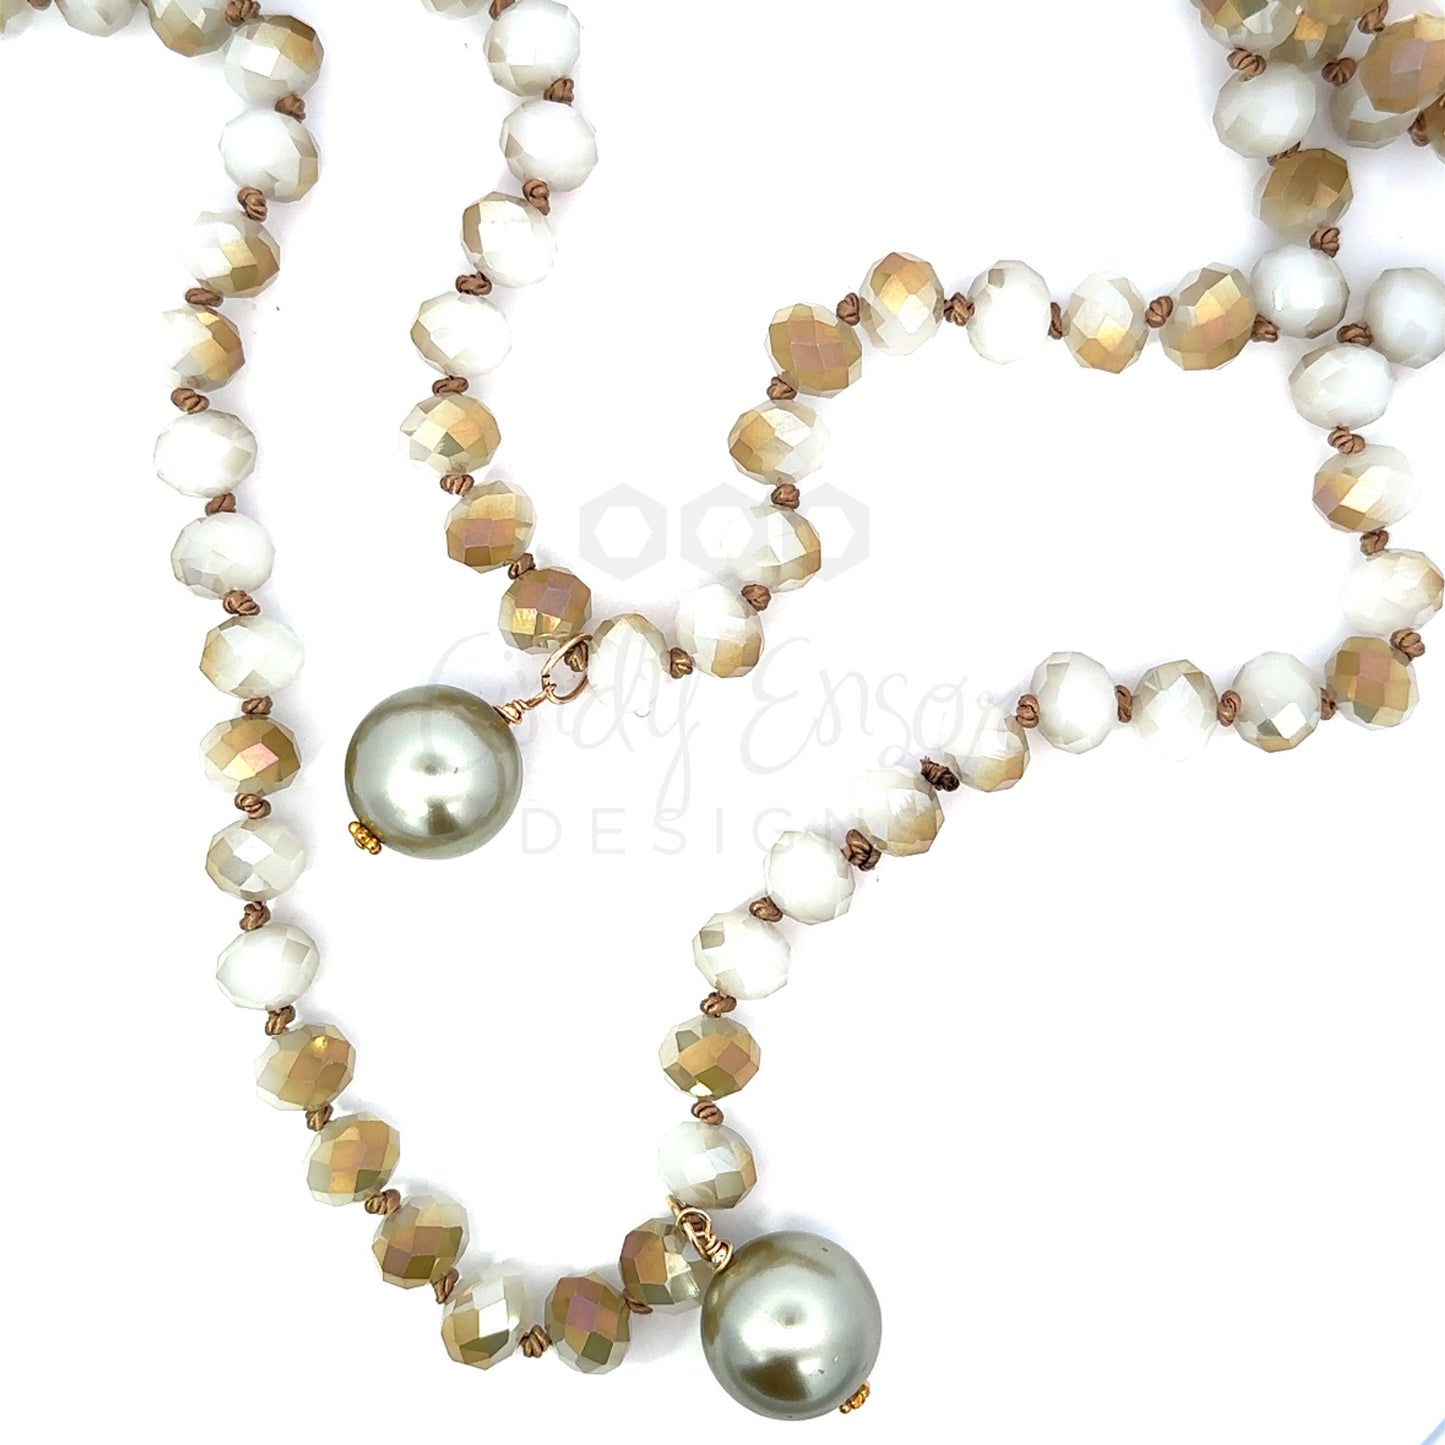 Hand Knotted Small Crystal Necklace with 2 Grey Pearl Accents